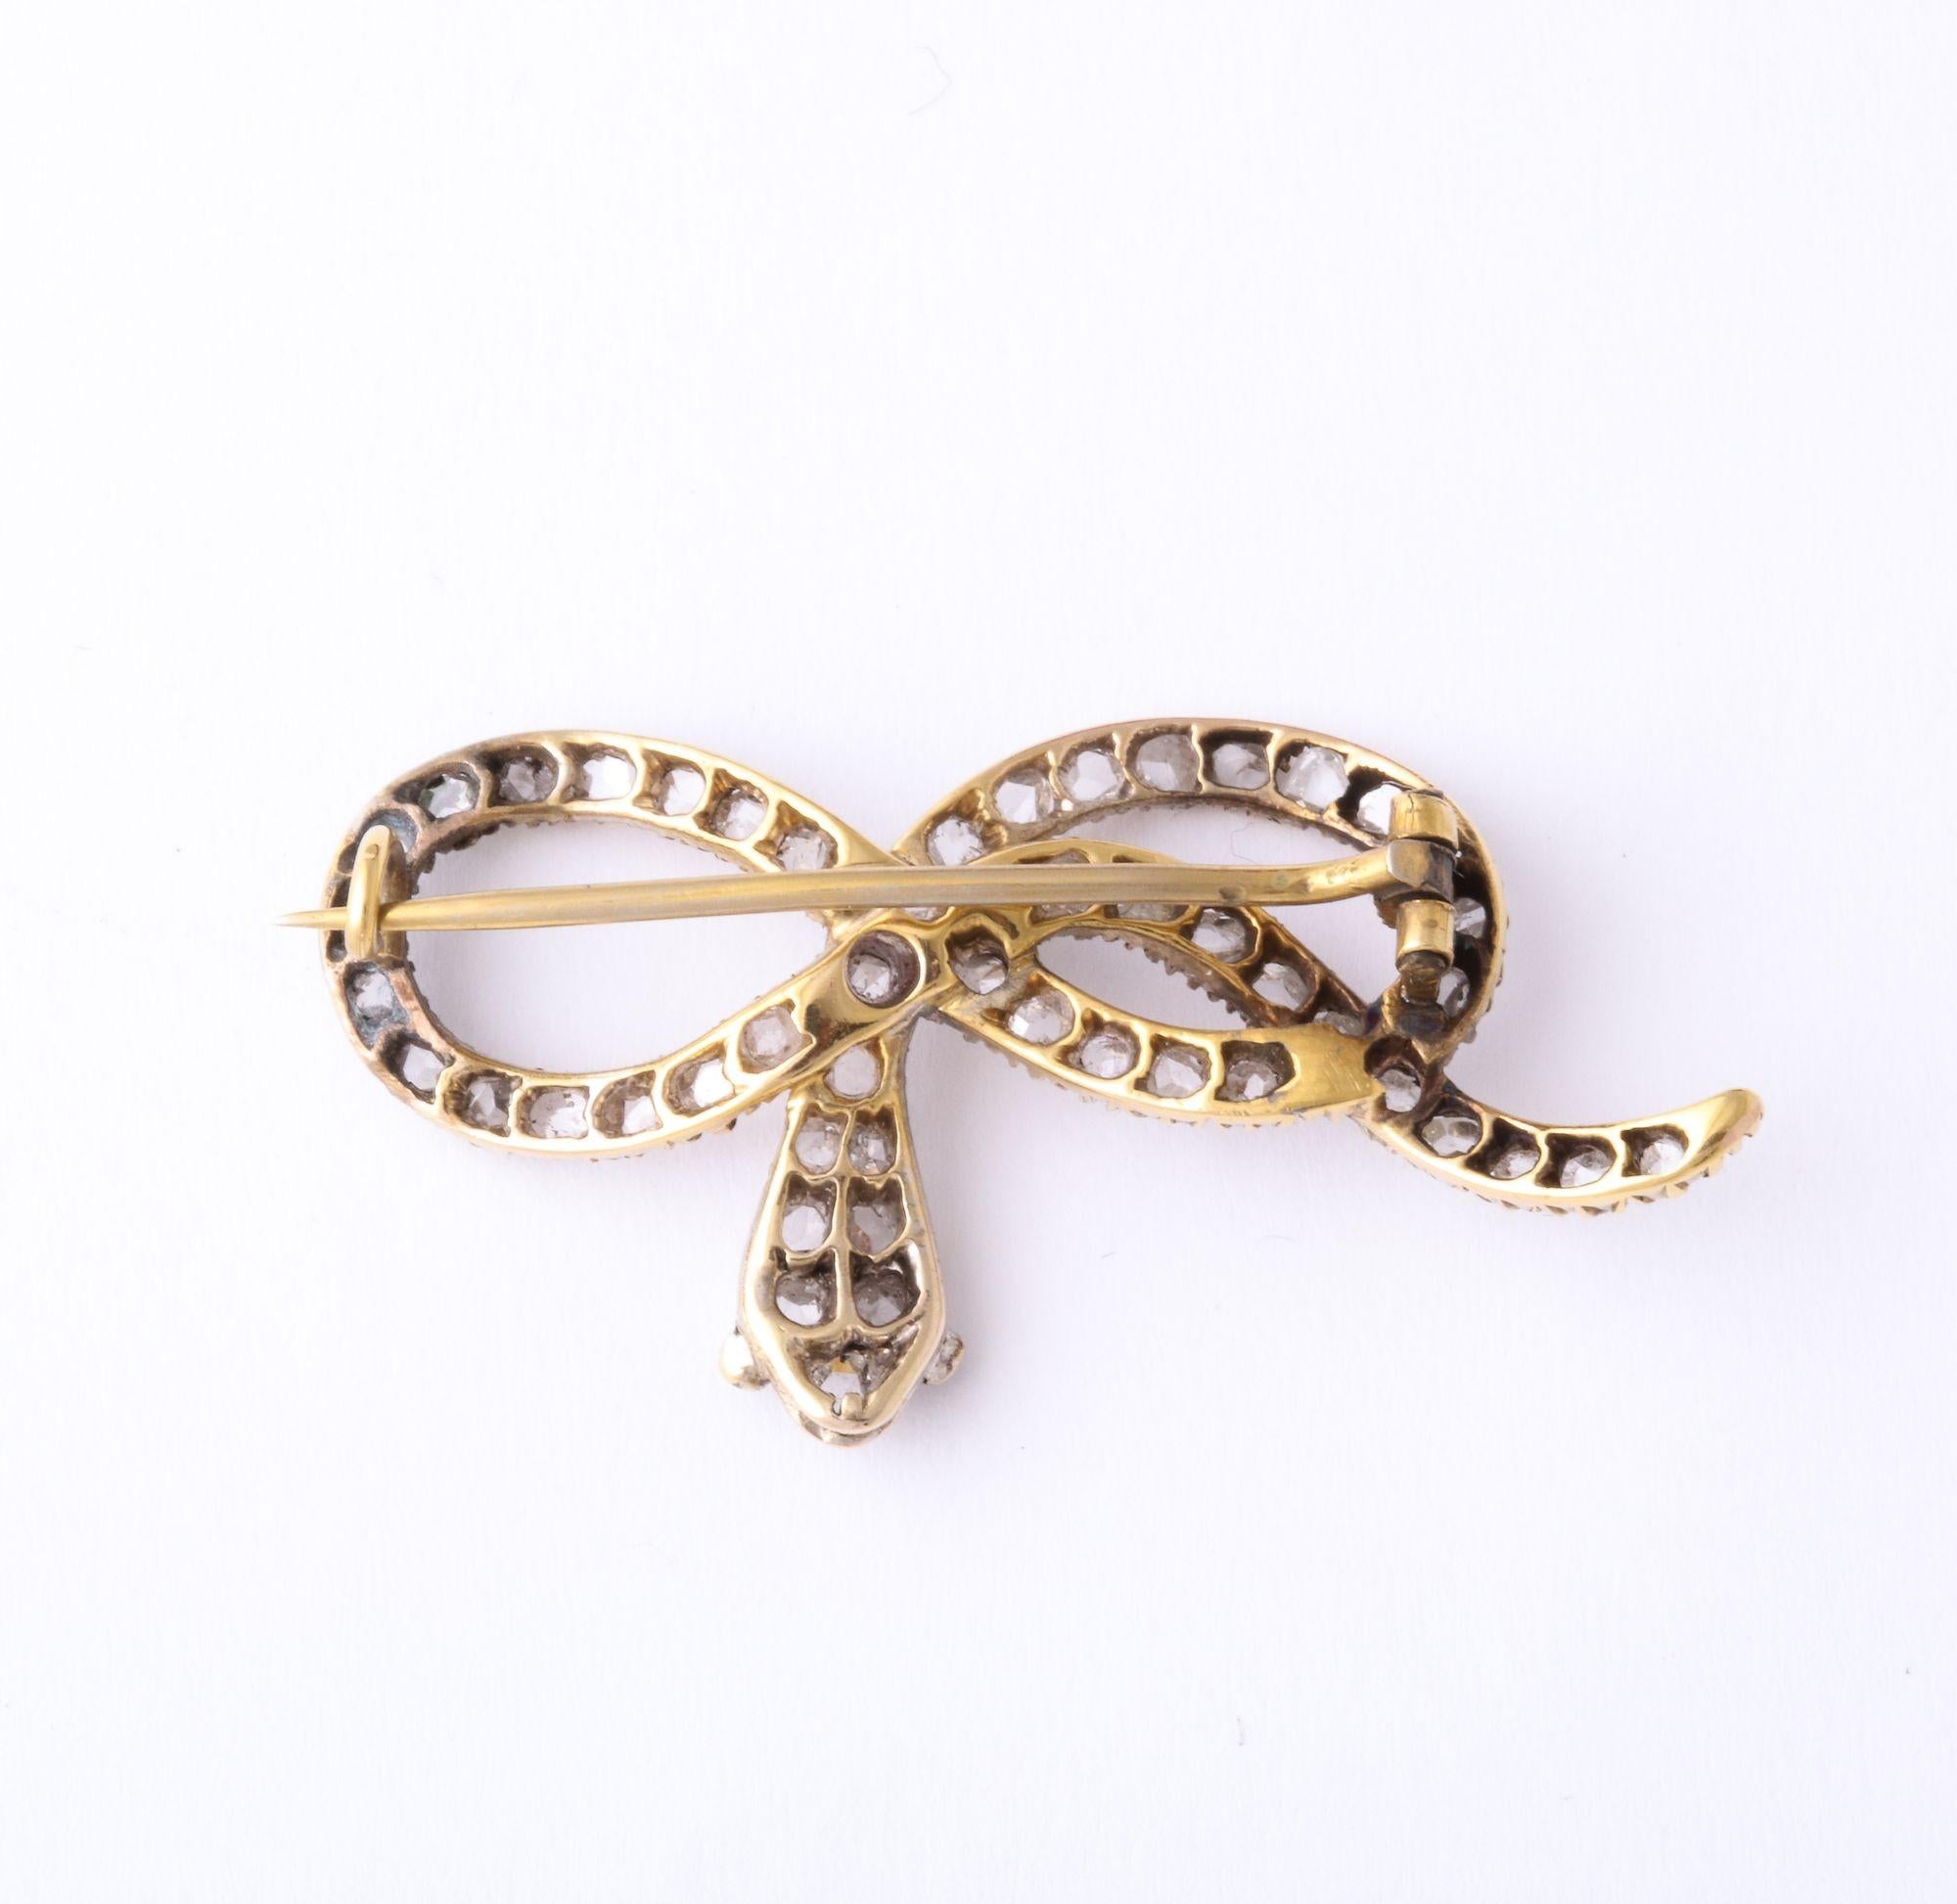 A great French Antique 'Victorian' Rose Diamond 'Infinity' Snake Brooch in 18k Gold with ruby eyes.